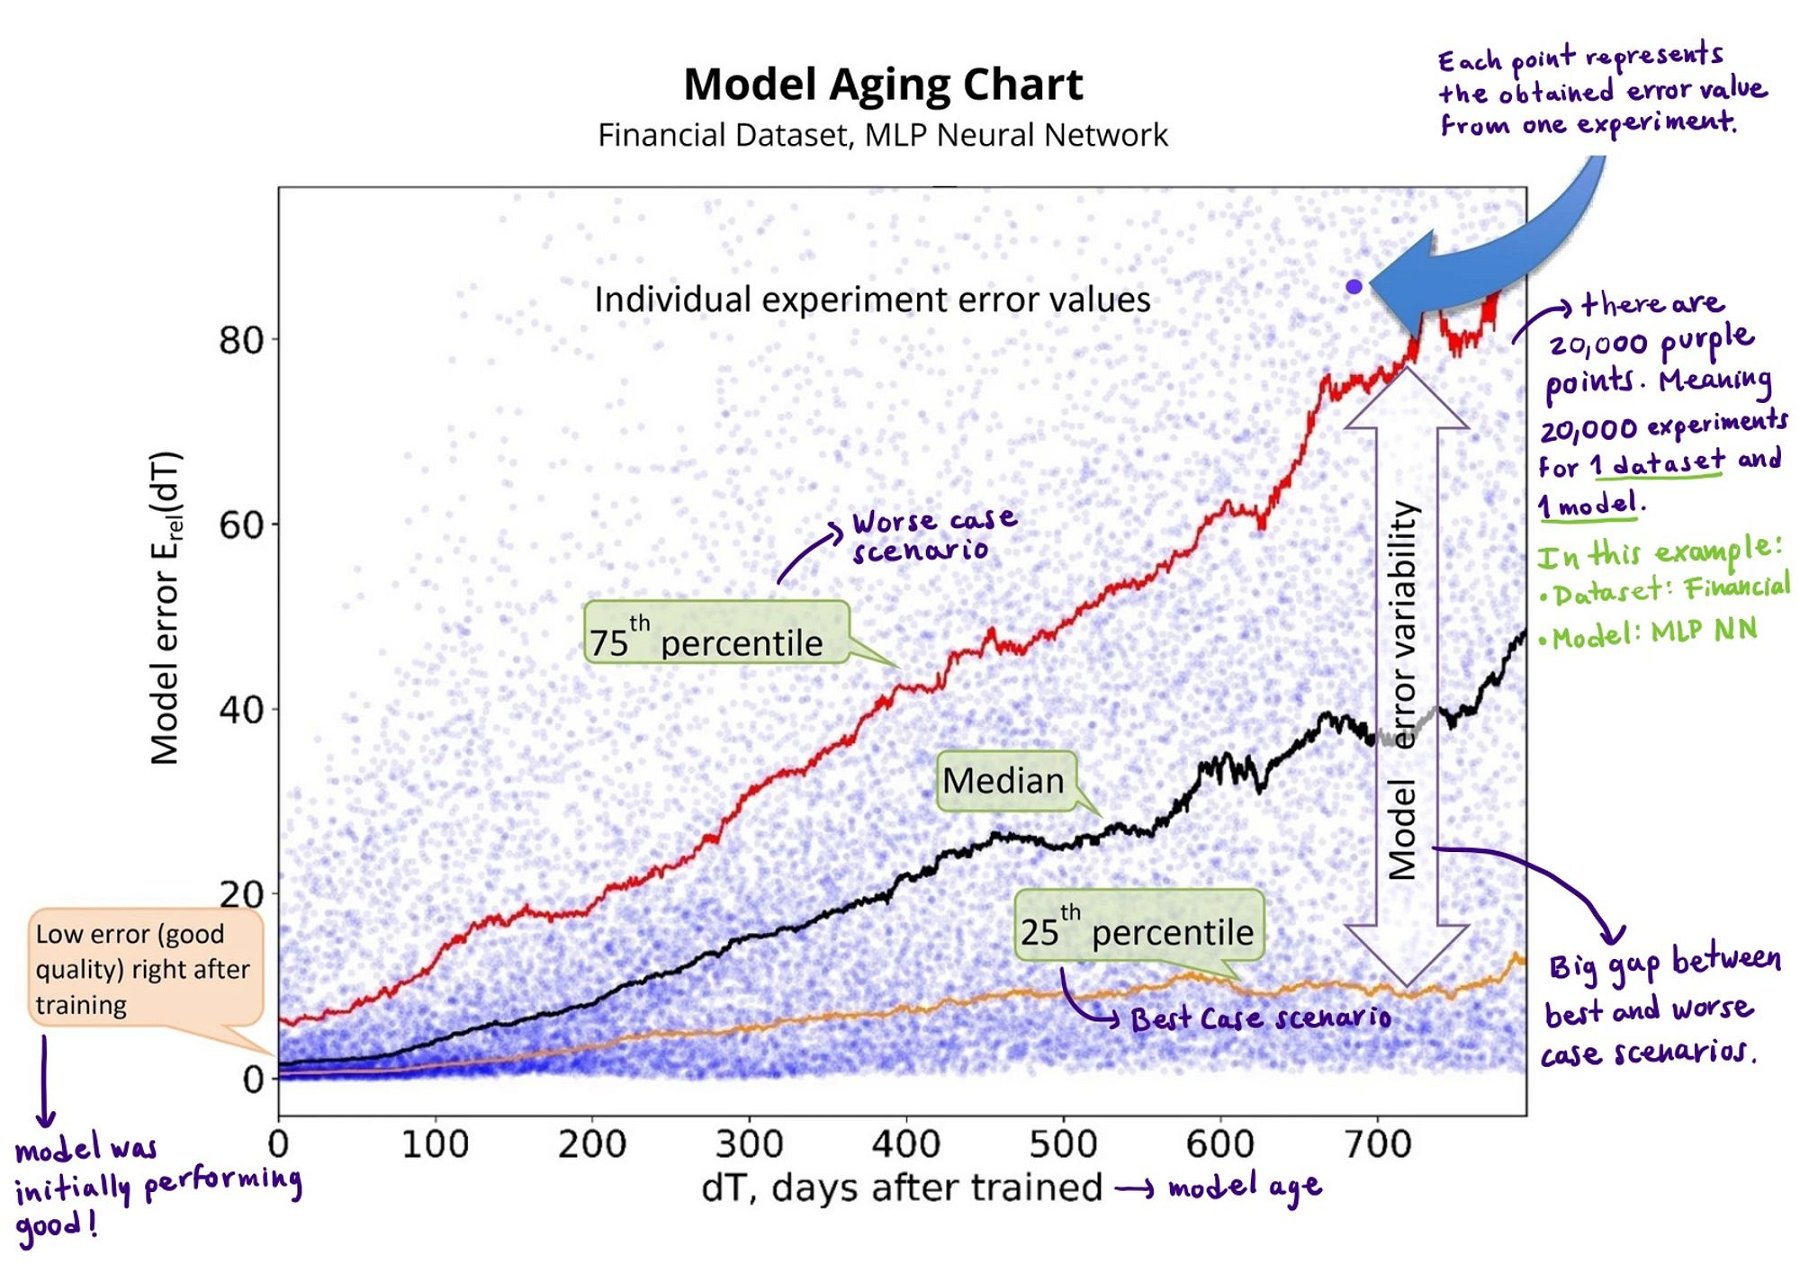 Model aging chart for the Financial dataset and the Neural Network model. Each small dot represents the outcome of a single temporal degradation experiment.